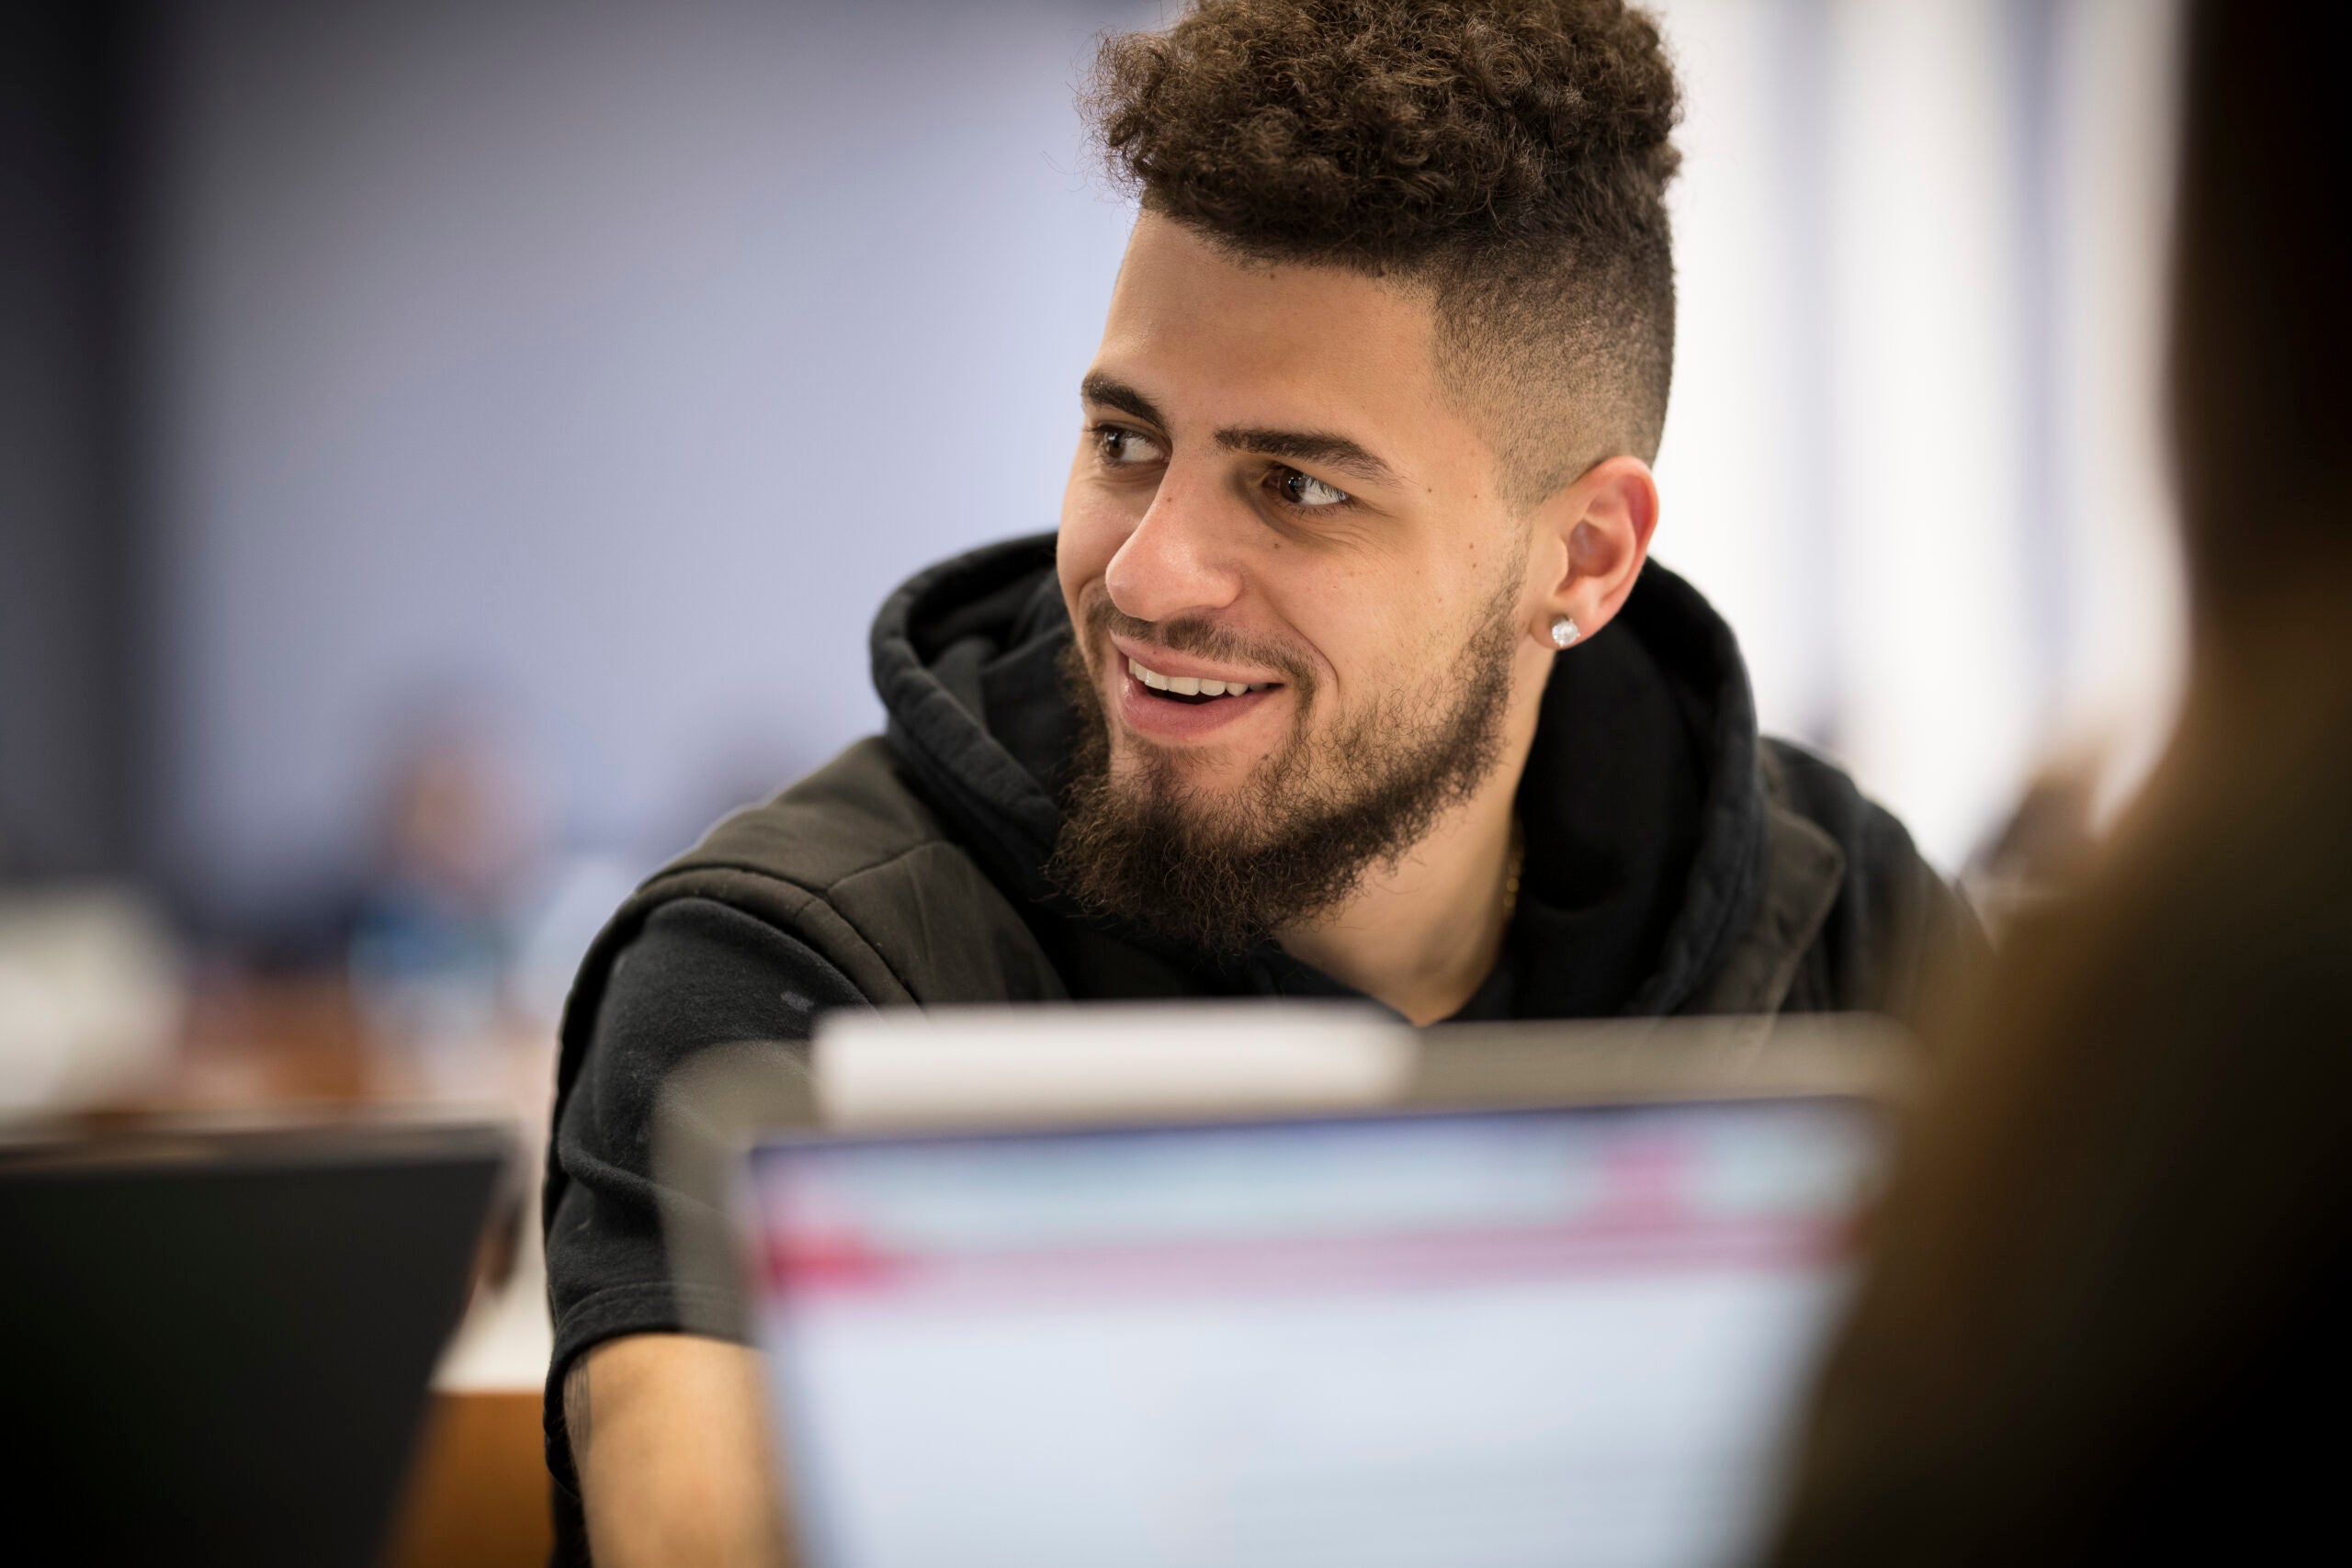 student looking to the left and smiling, with computer in the foreground